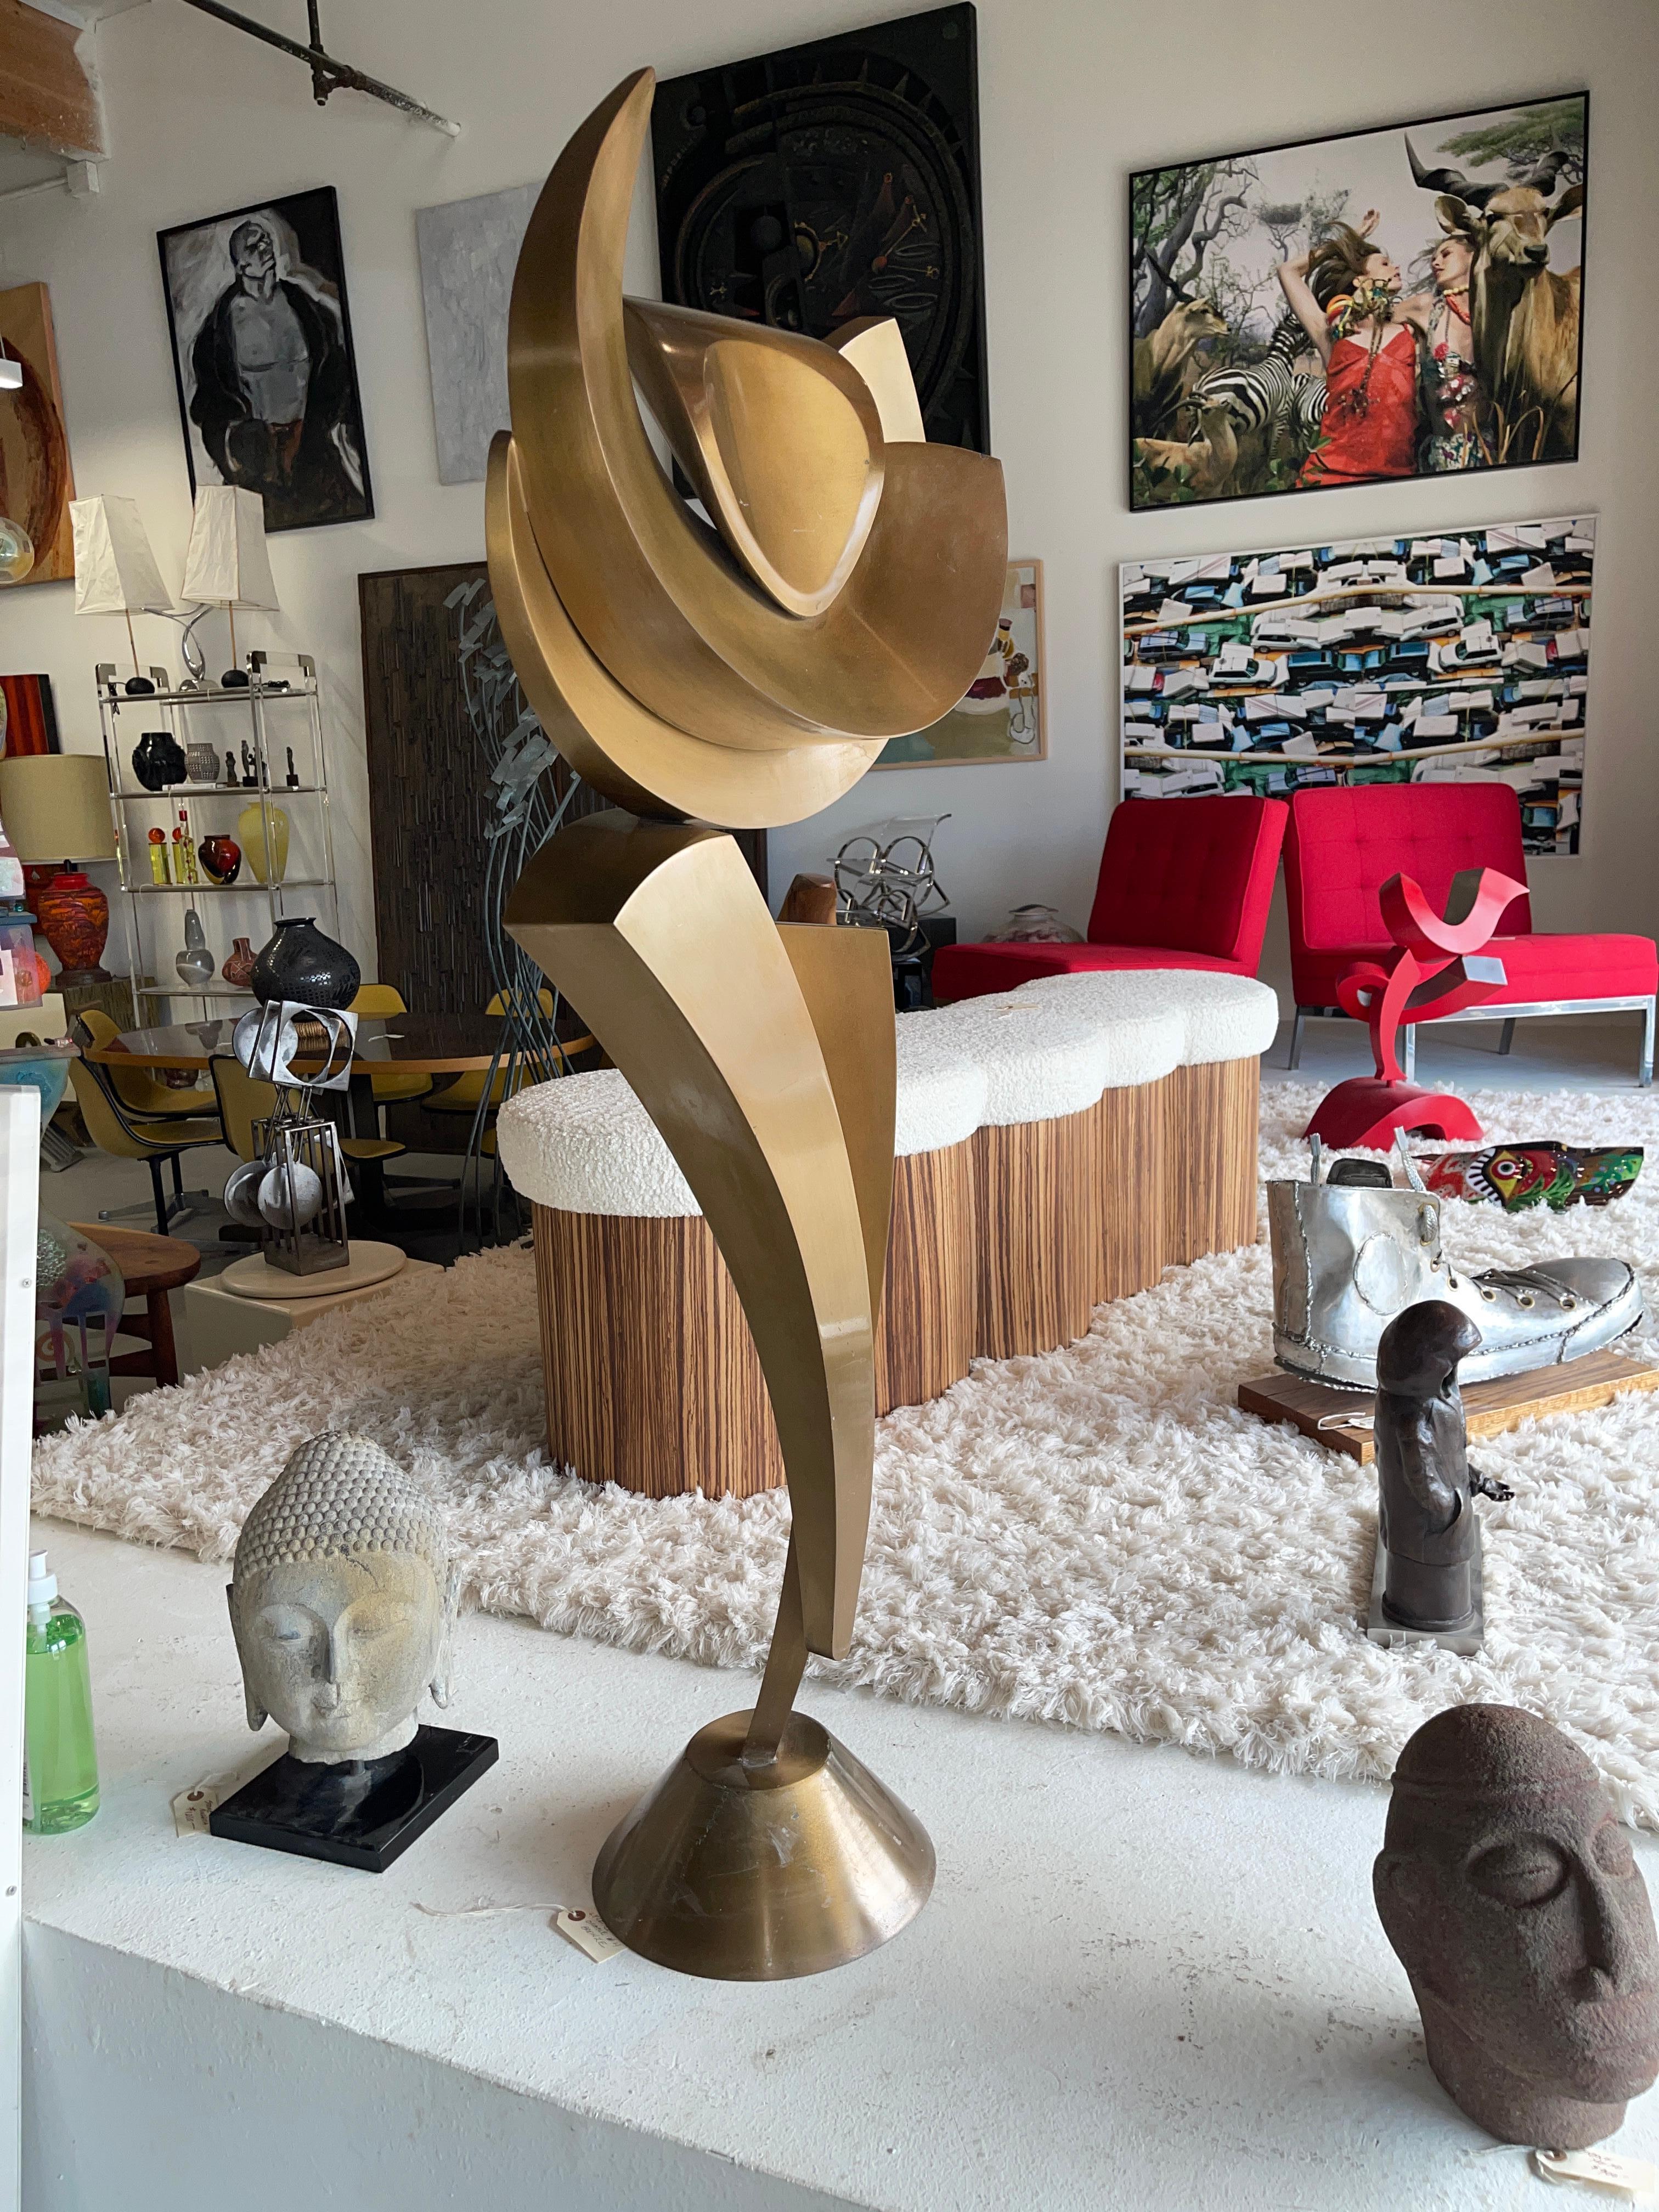 Lyle London large scale bronze abstract sculpture title Oracle #4. It was purchased directly from the artist in 1998 and will be accompanied by a copy of the receipt which is pictured. The bronze flows beautifully and will make a nice addition to